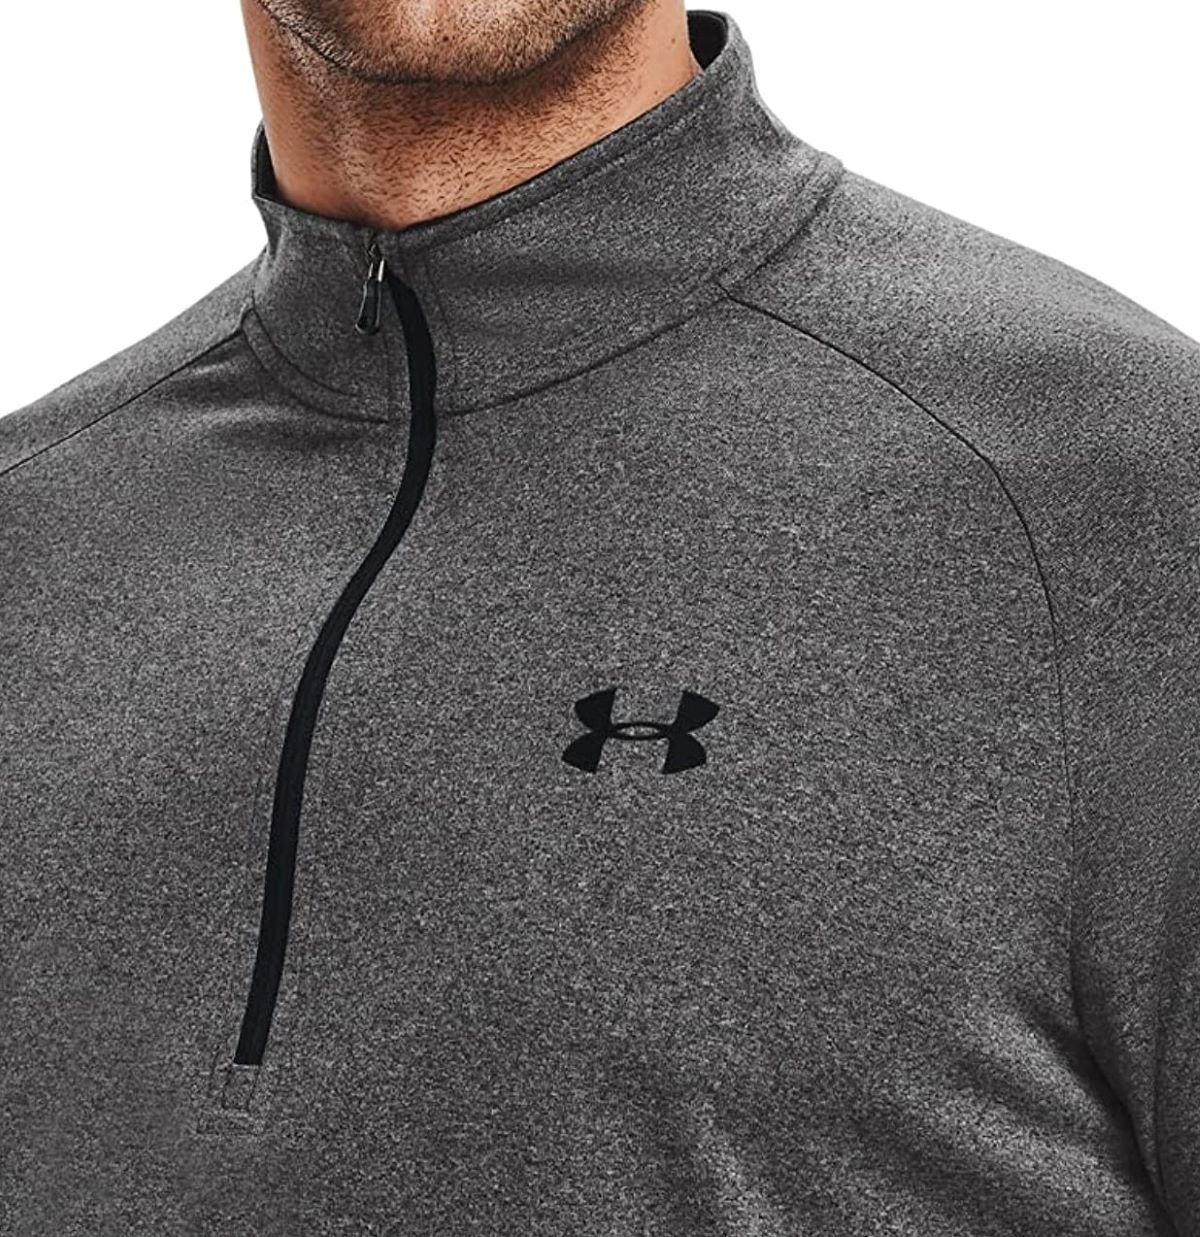 Under Armour Men’s 1/2 Zip Shirt Only $14.98 on Amazon (Reg. $45) | Sizes Up to 4XL